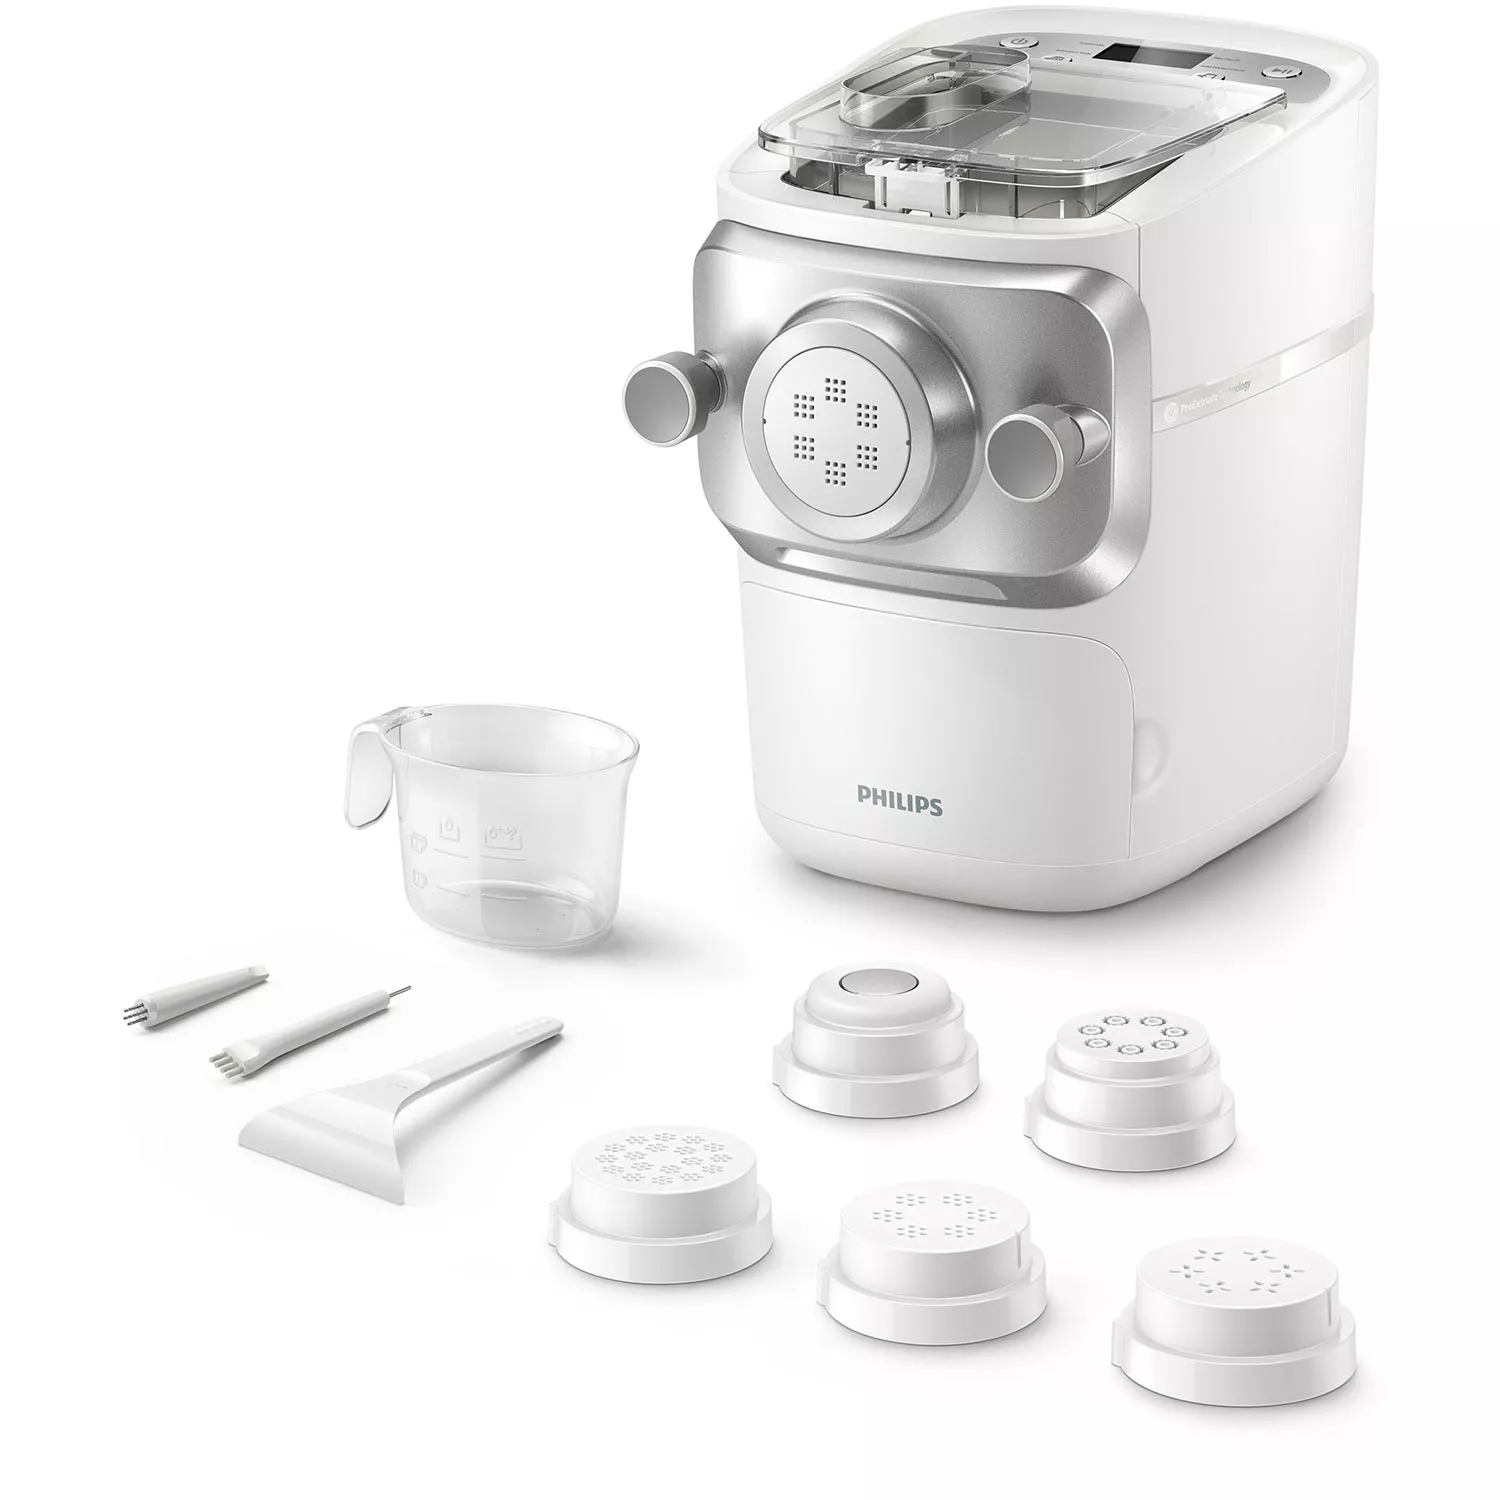 Enjoy Fresh Pasta in Under 20 with the Philips Smart Pasta Maker 